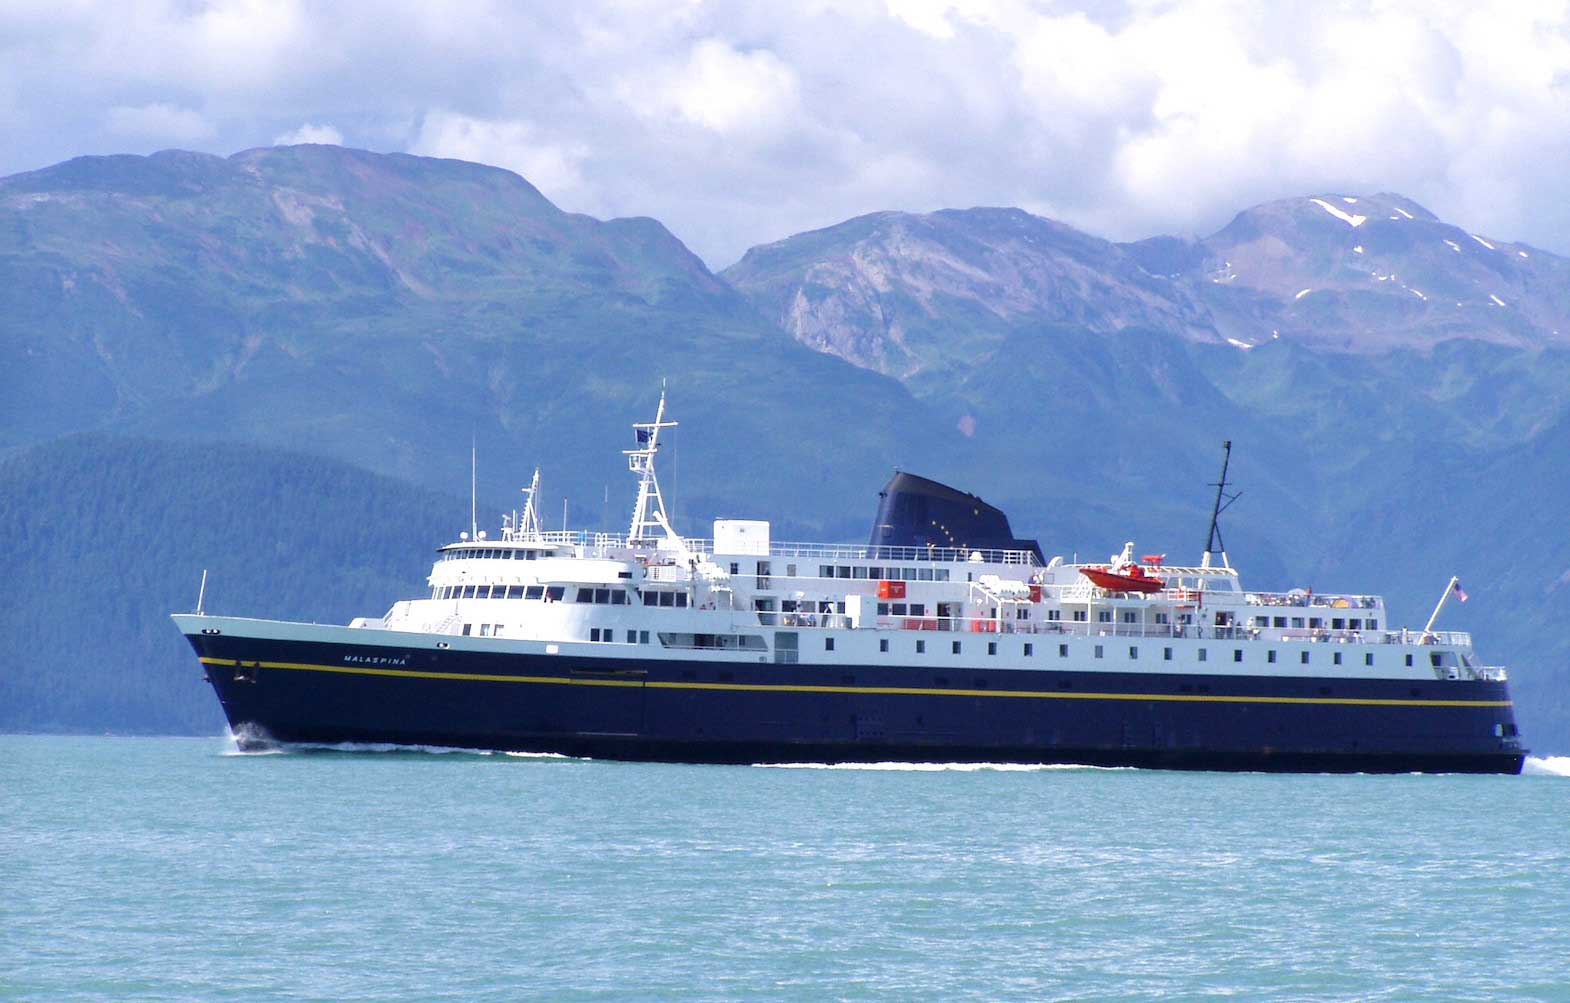 Alaska offers PH a 58yearold ferry for free